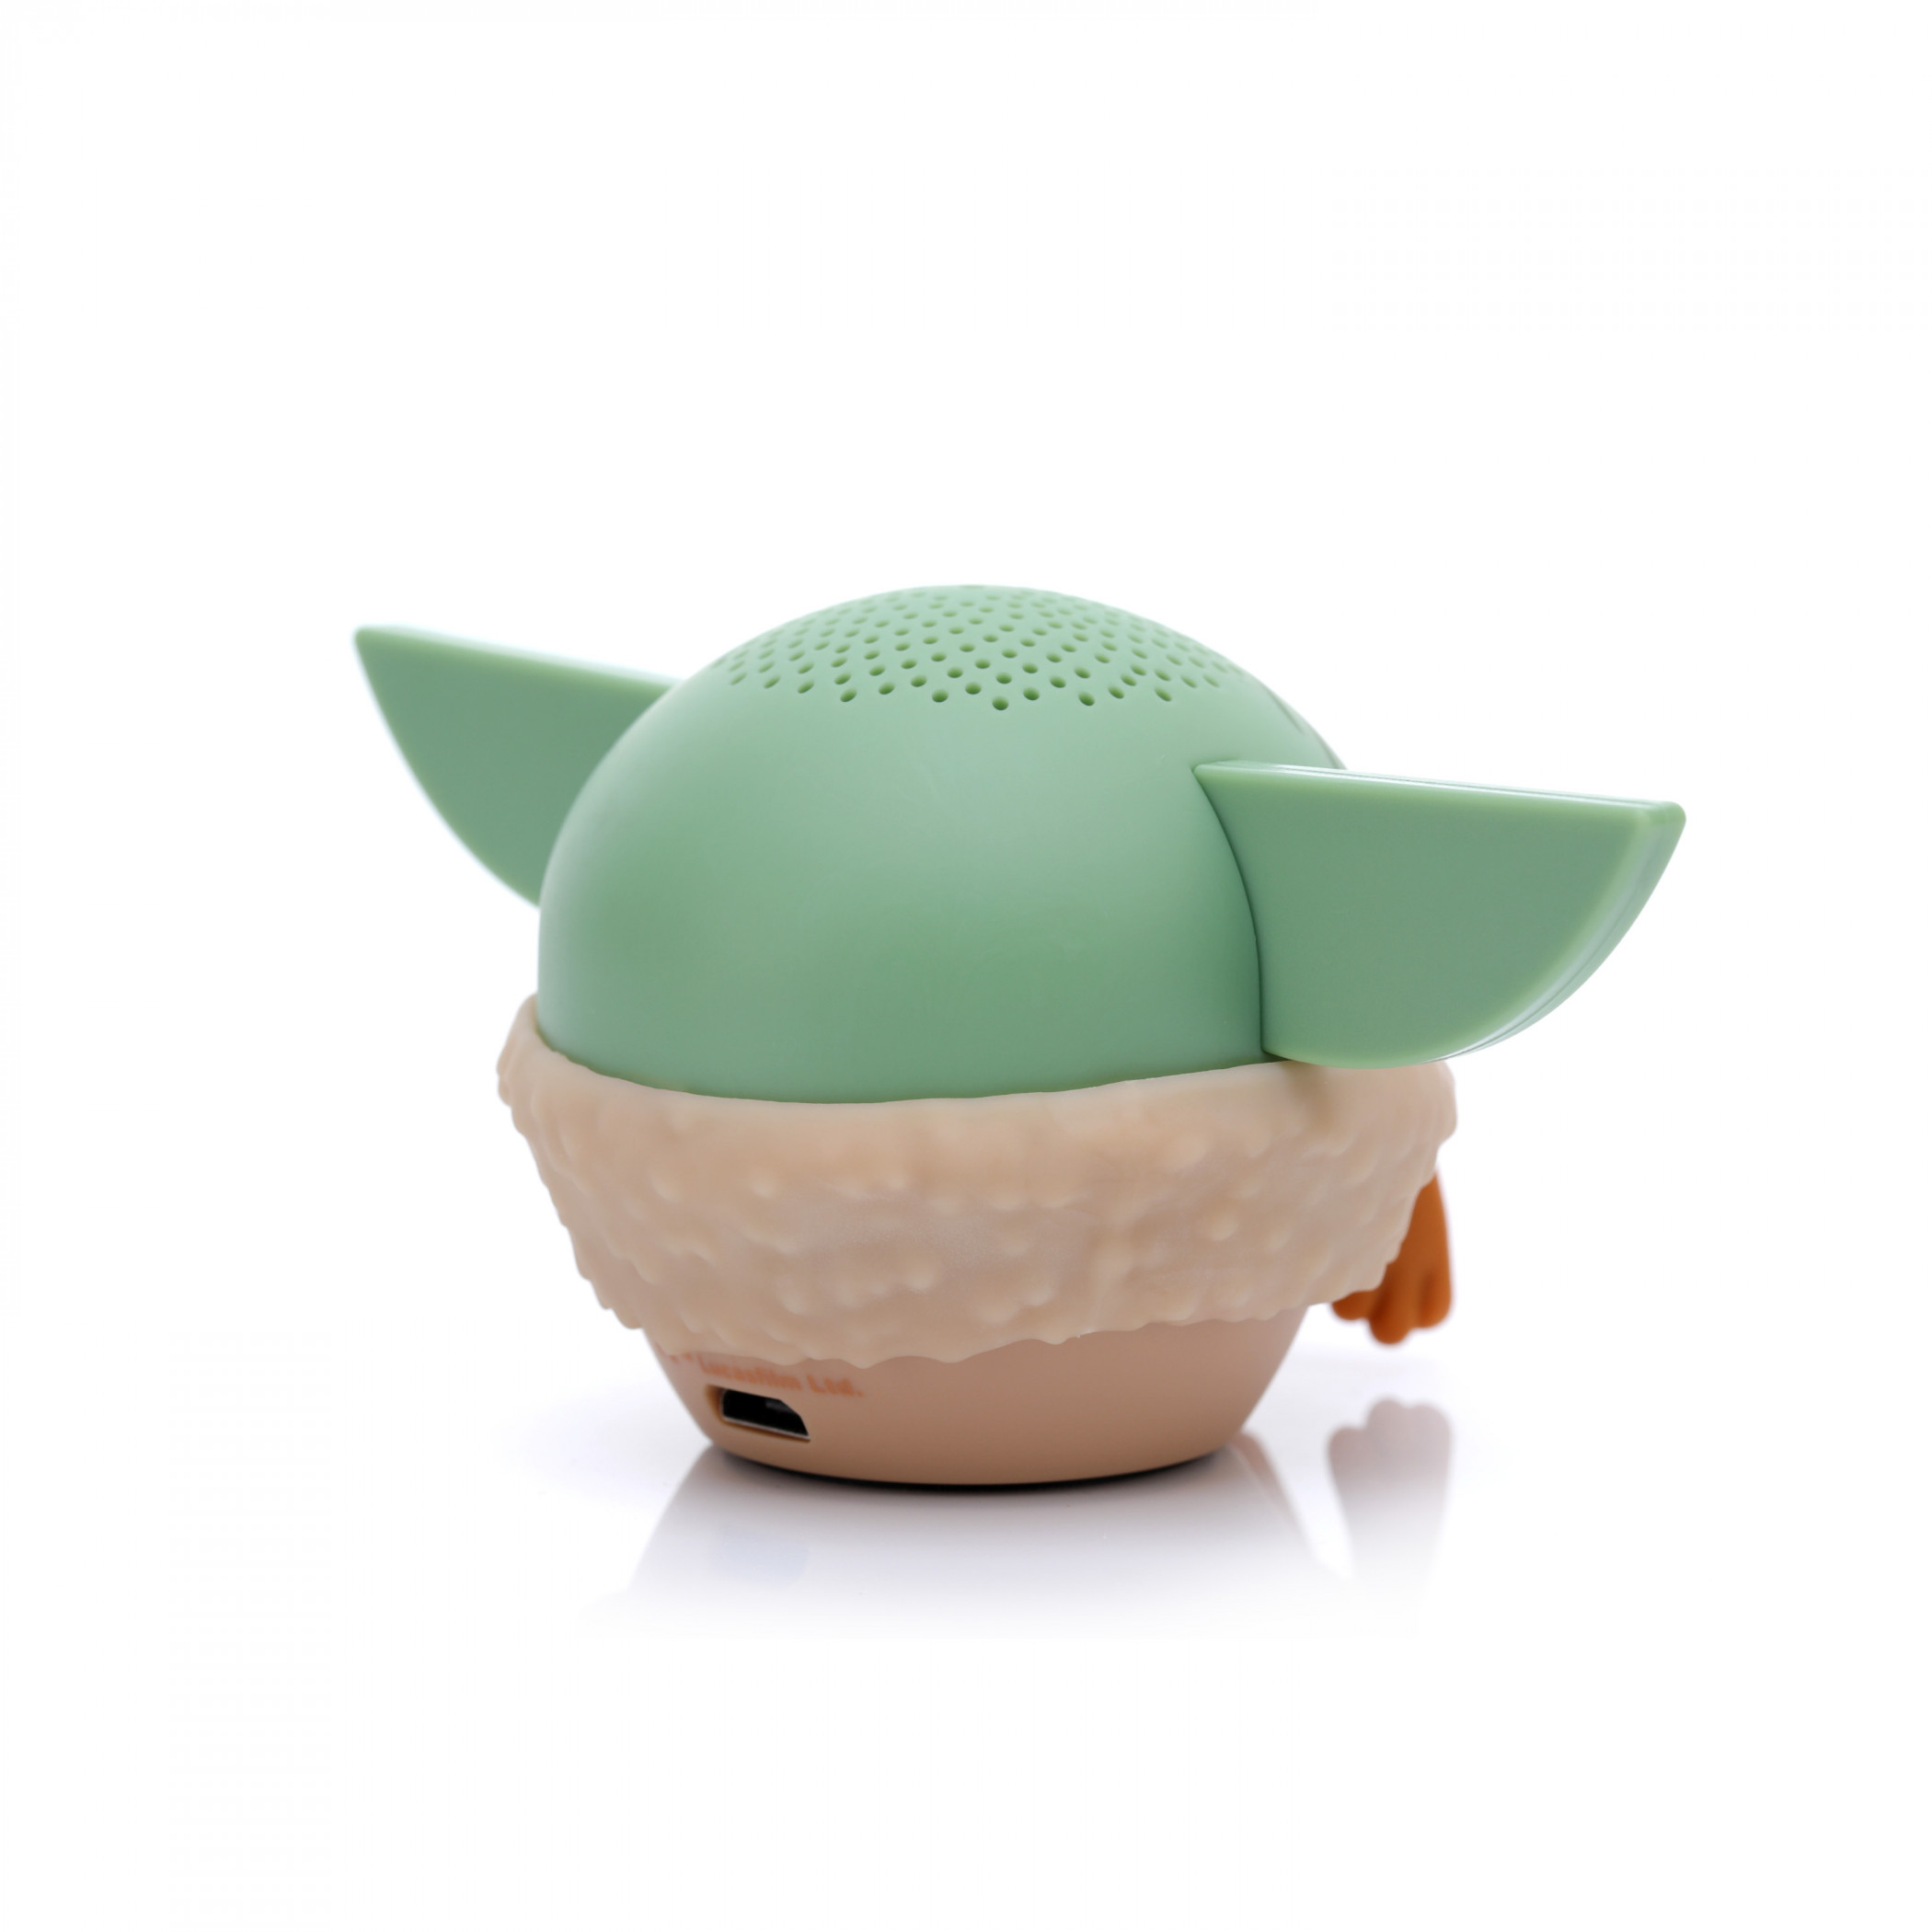 Star Wars The Child Grogu With Frog Bitty Boomers Bluetooth Speaker